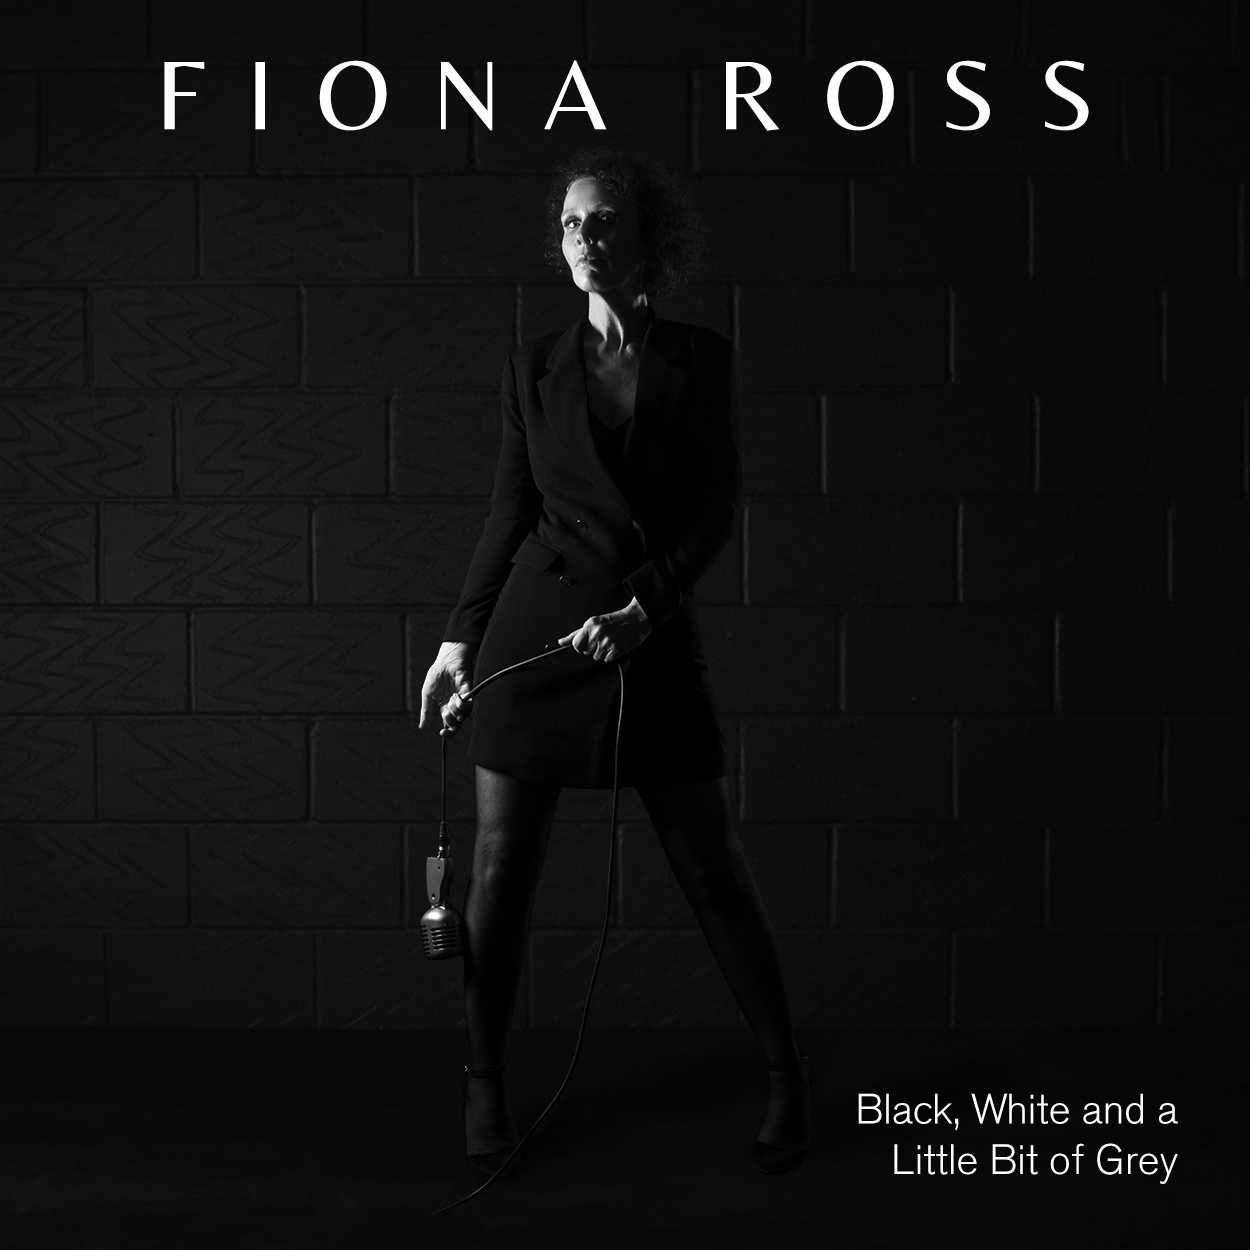 Fiona Ross - Black, White and a Little Bit of Grey